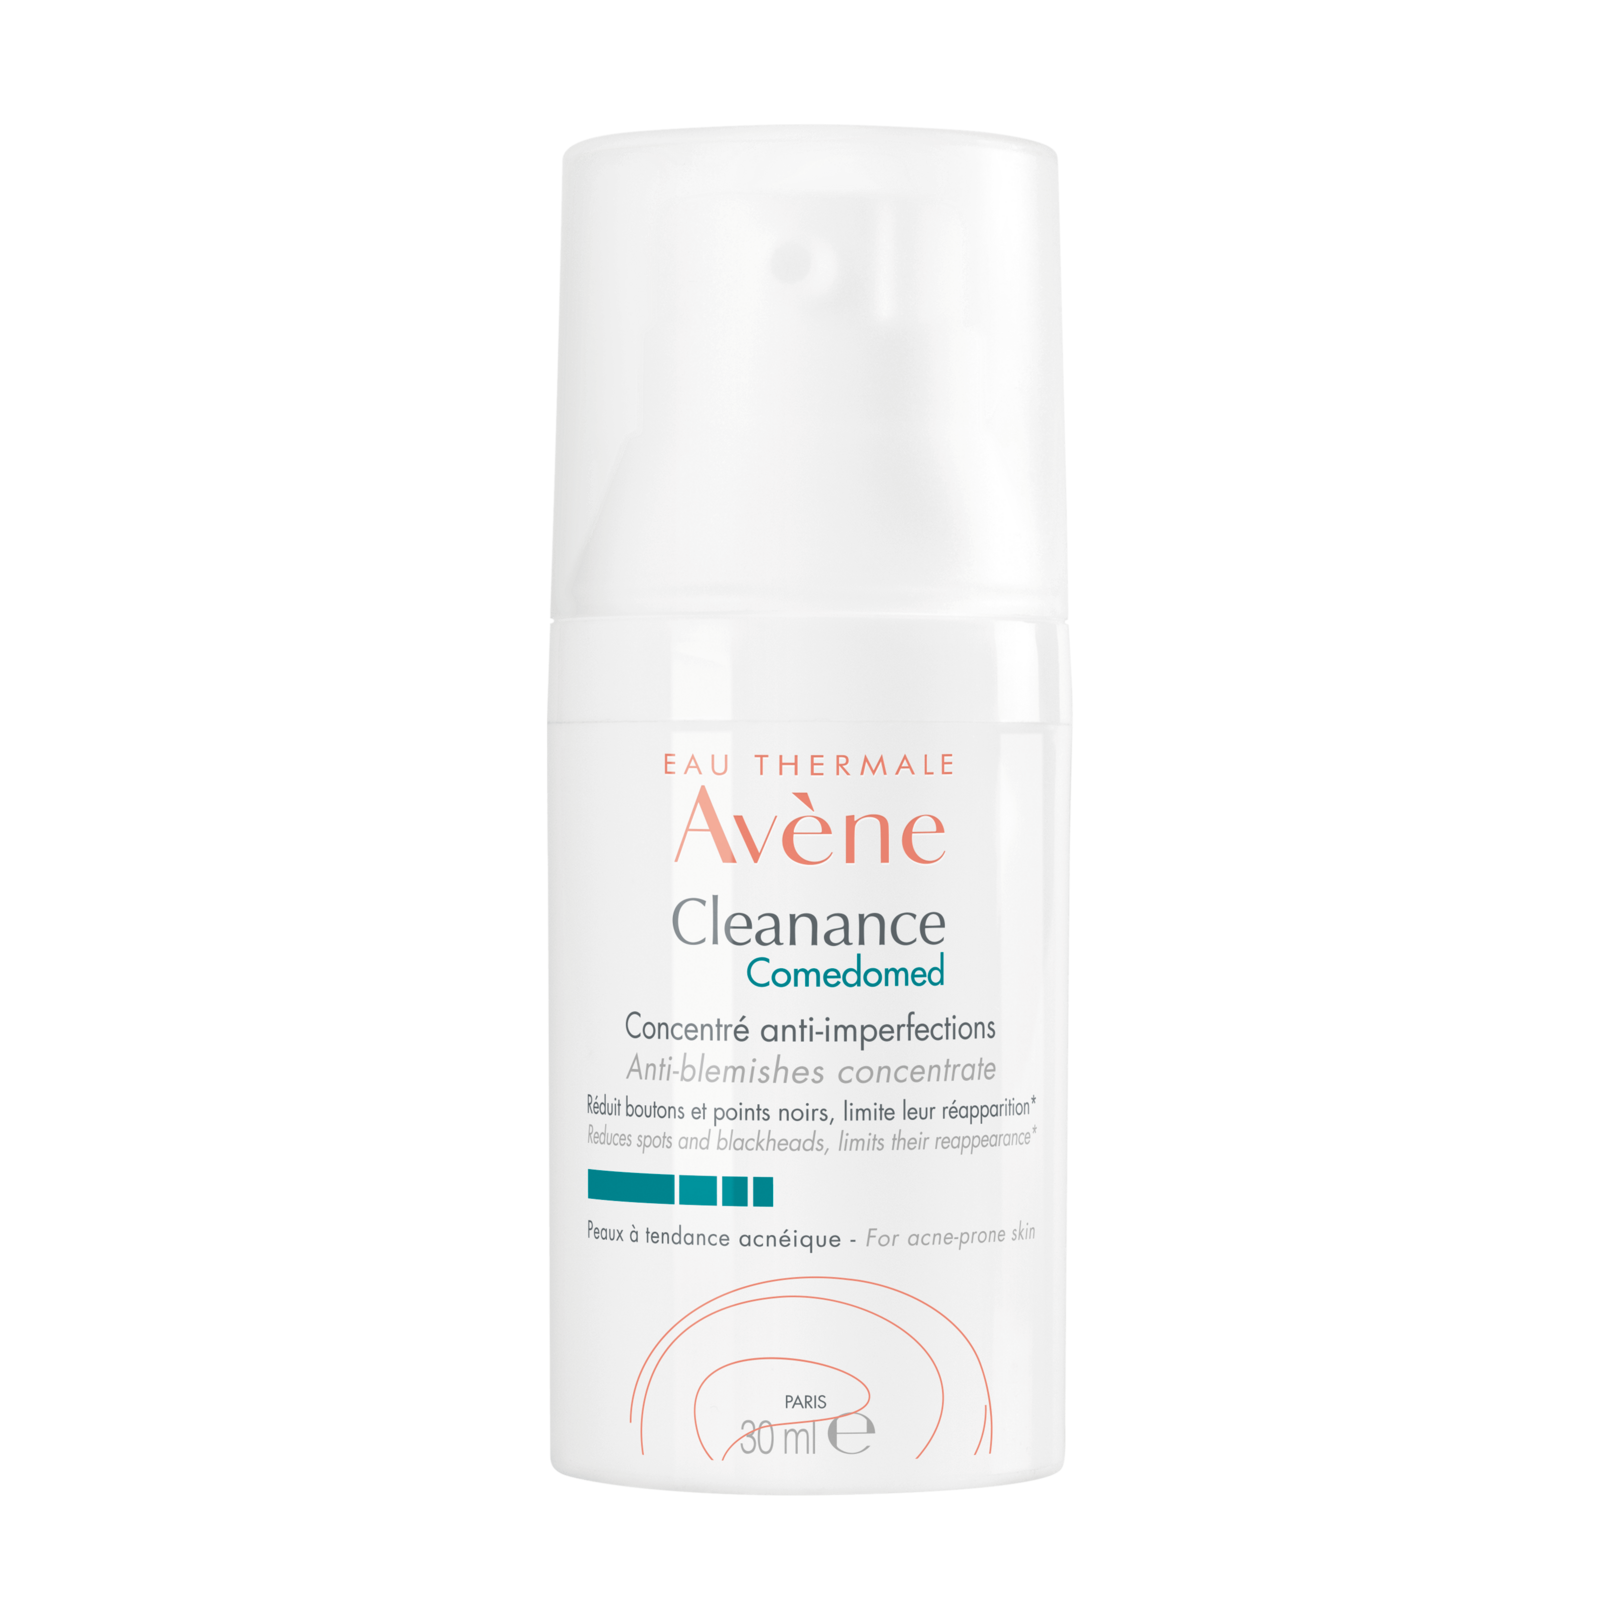 CLEANANCE COMEDOMED Anti-blemishes Concentrate